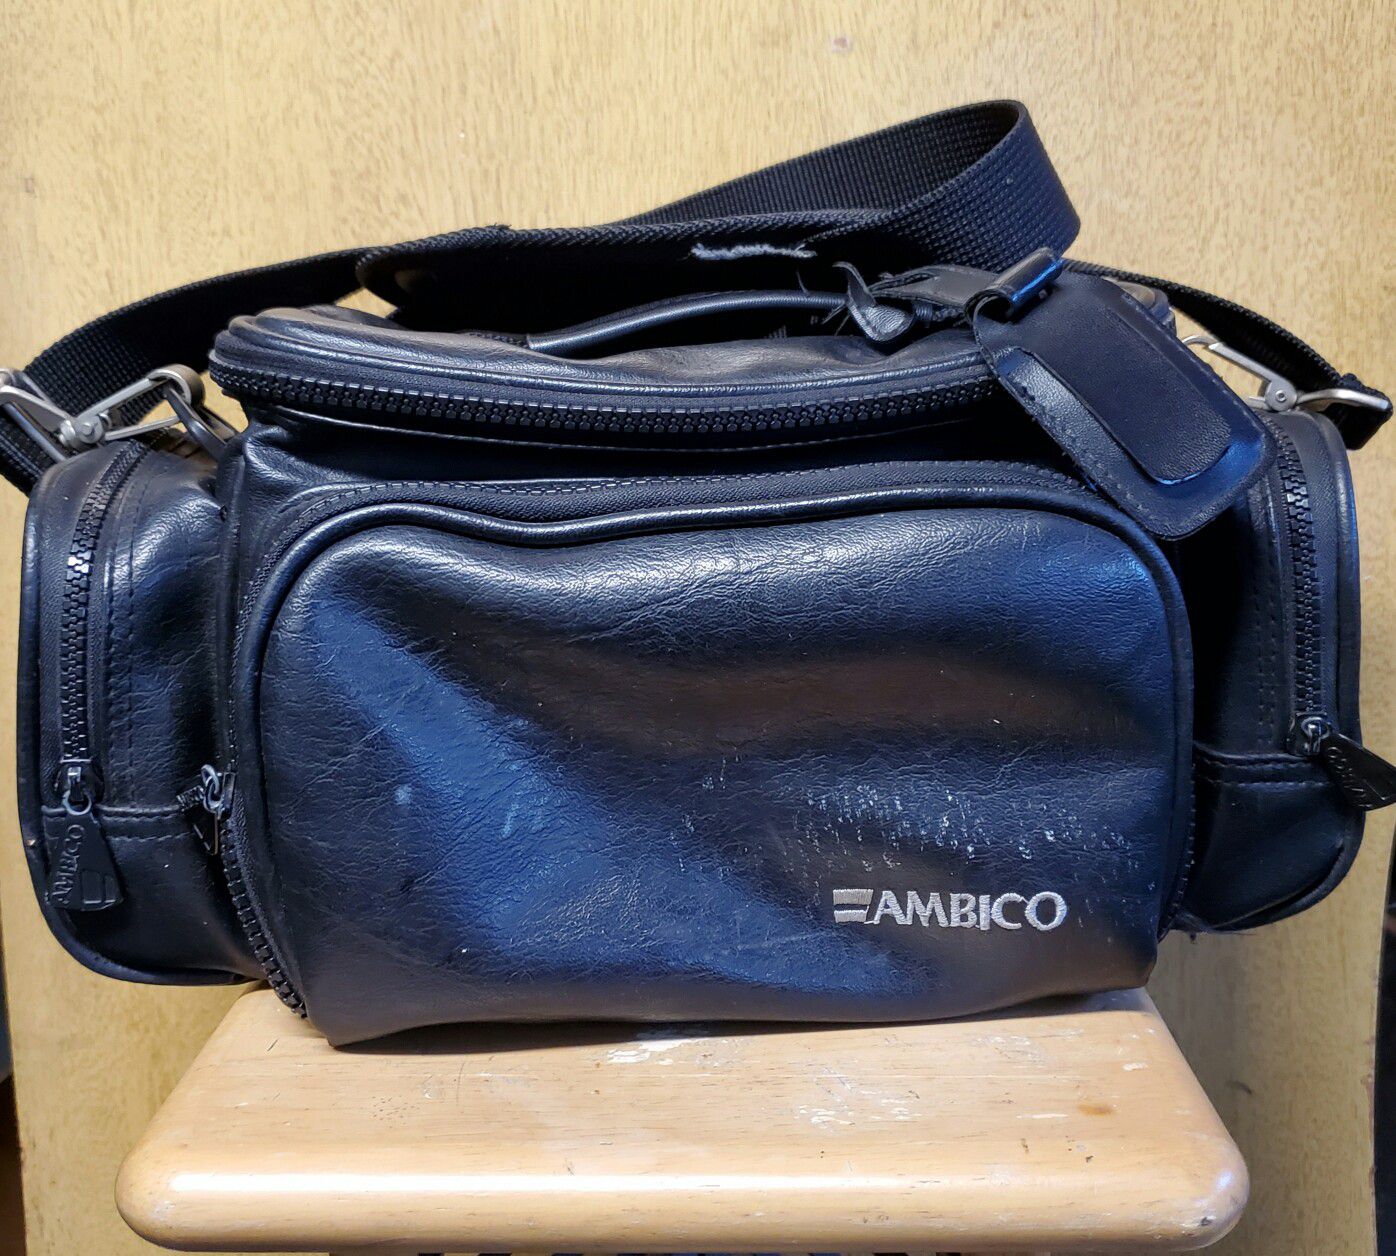 Ambico classic leather bag